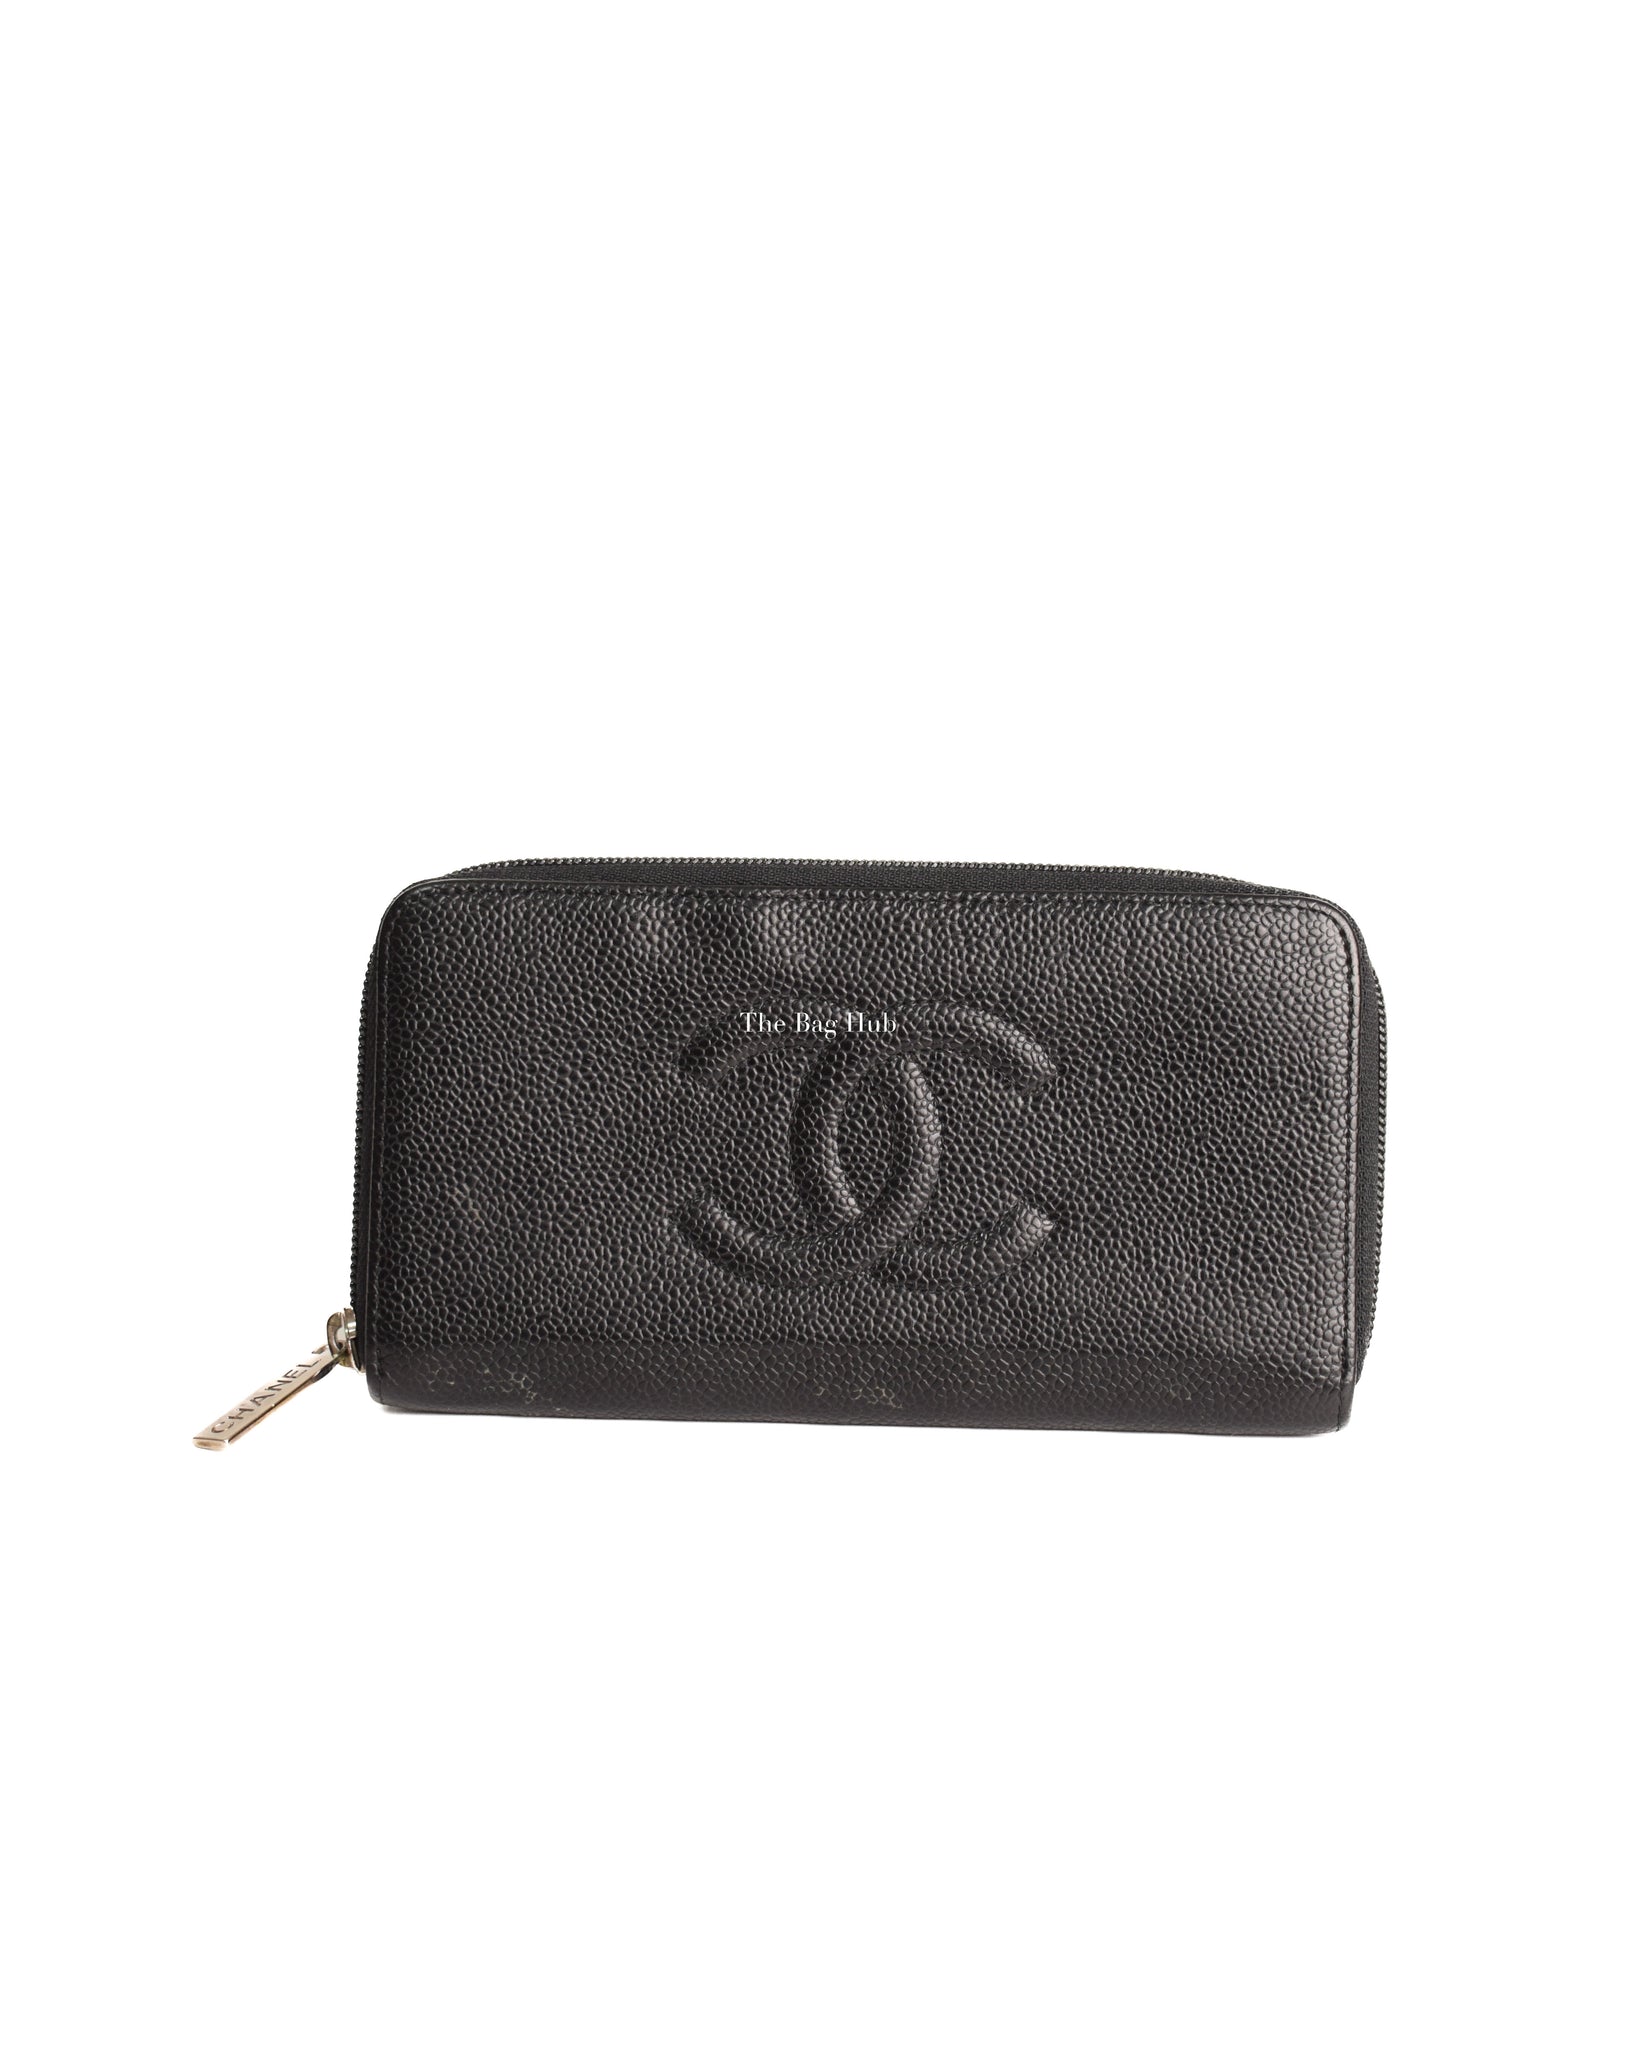 Chanel Black Timeless CC Zipped Around Long Wallet, Designer Brand, Authentic Chanel